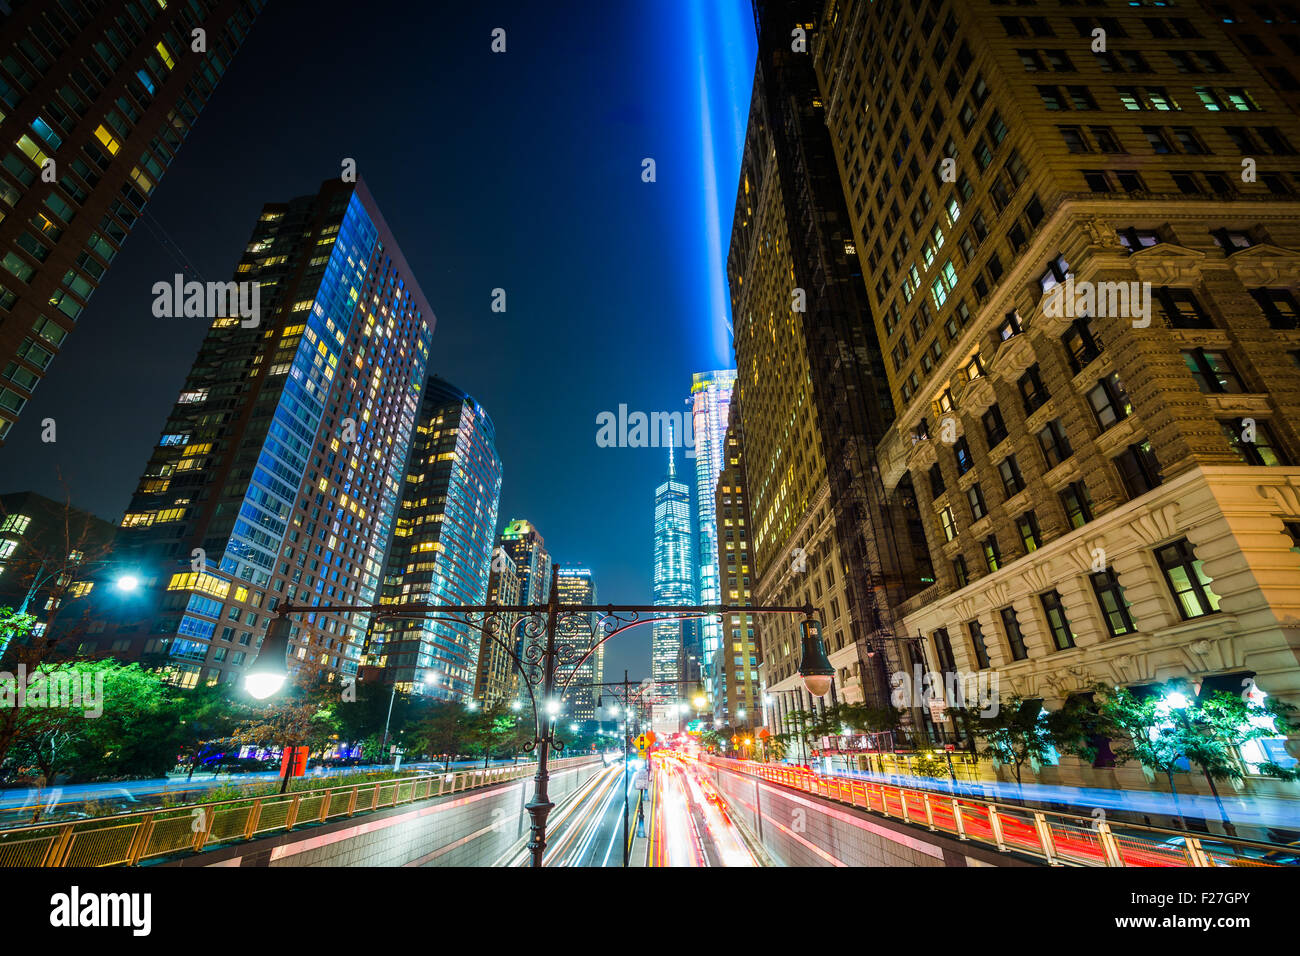 The Battery Park Underpass and 1 World Trade Center with the Tribute in Light, seen at night in Lower Manhattan, New York. Stock Photo